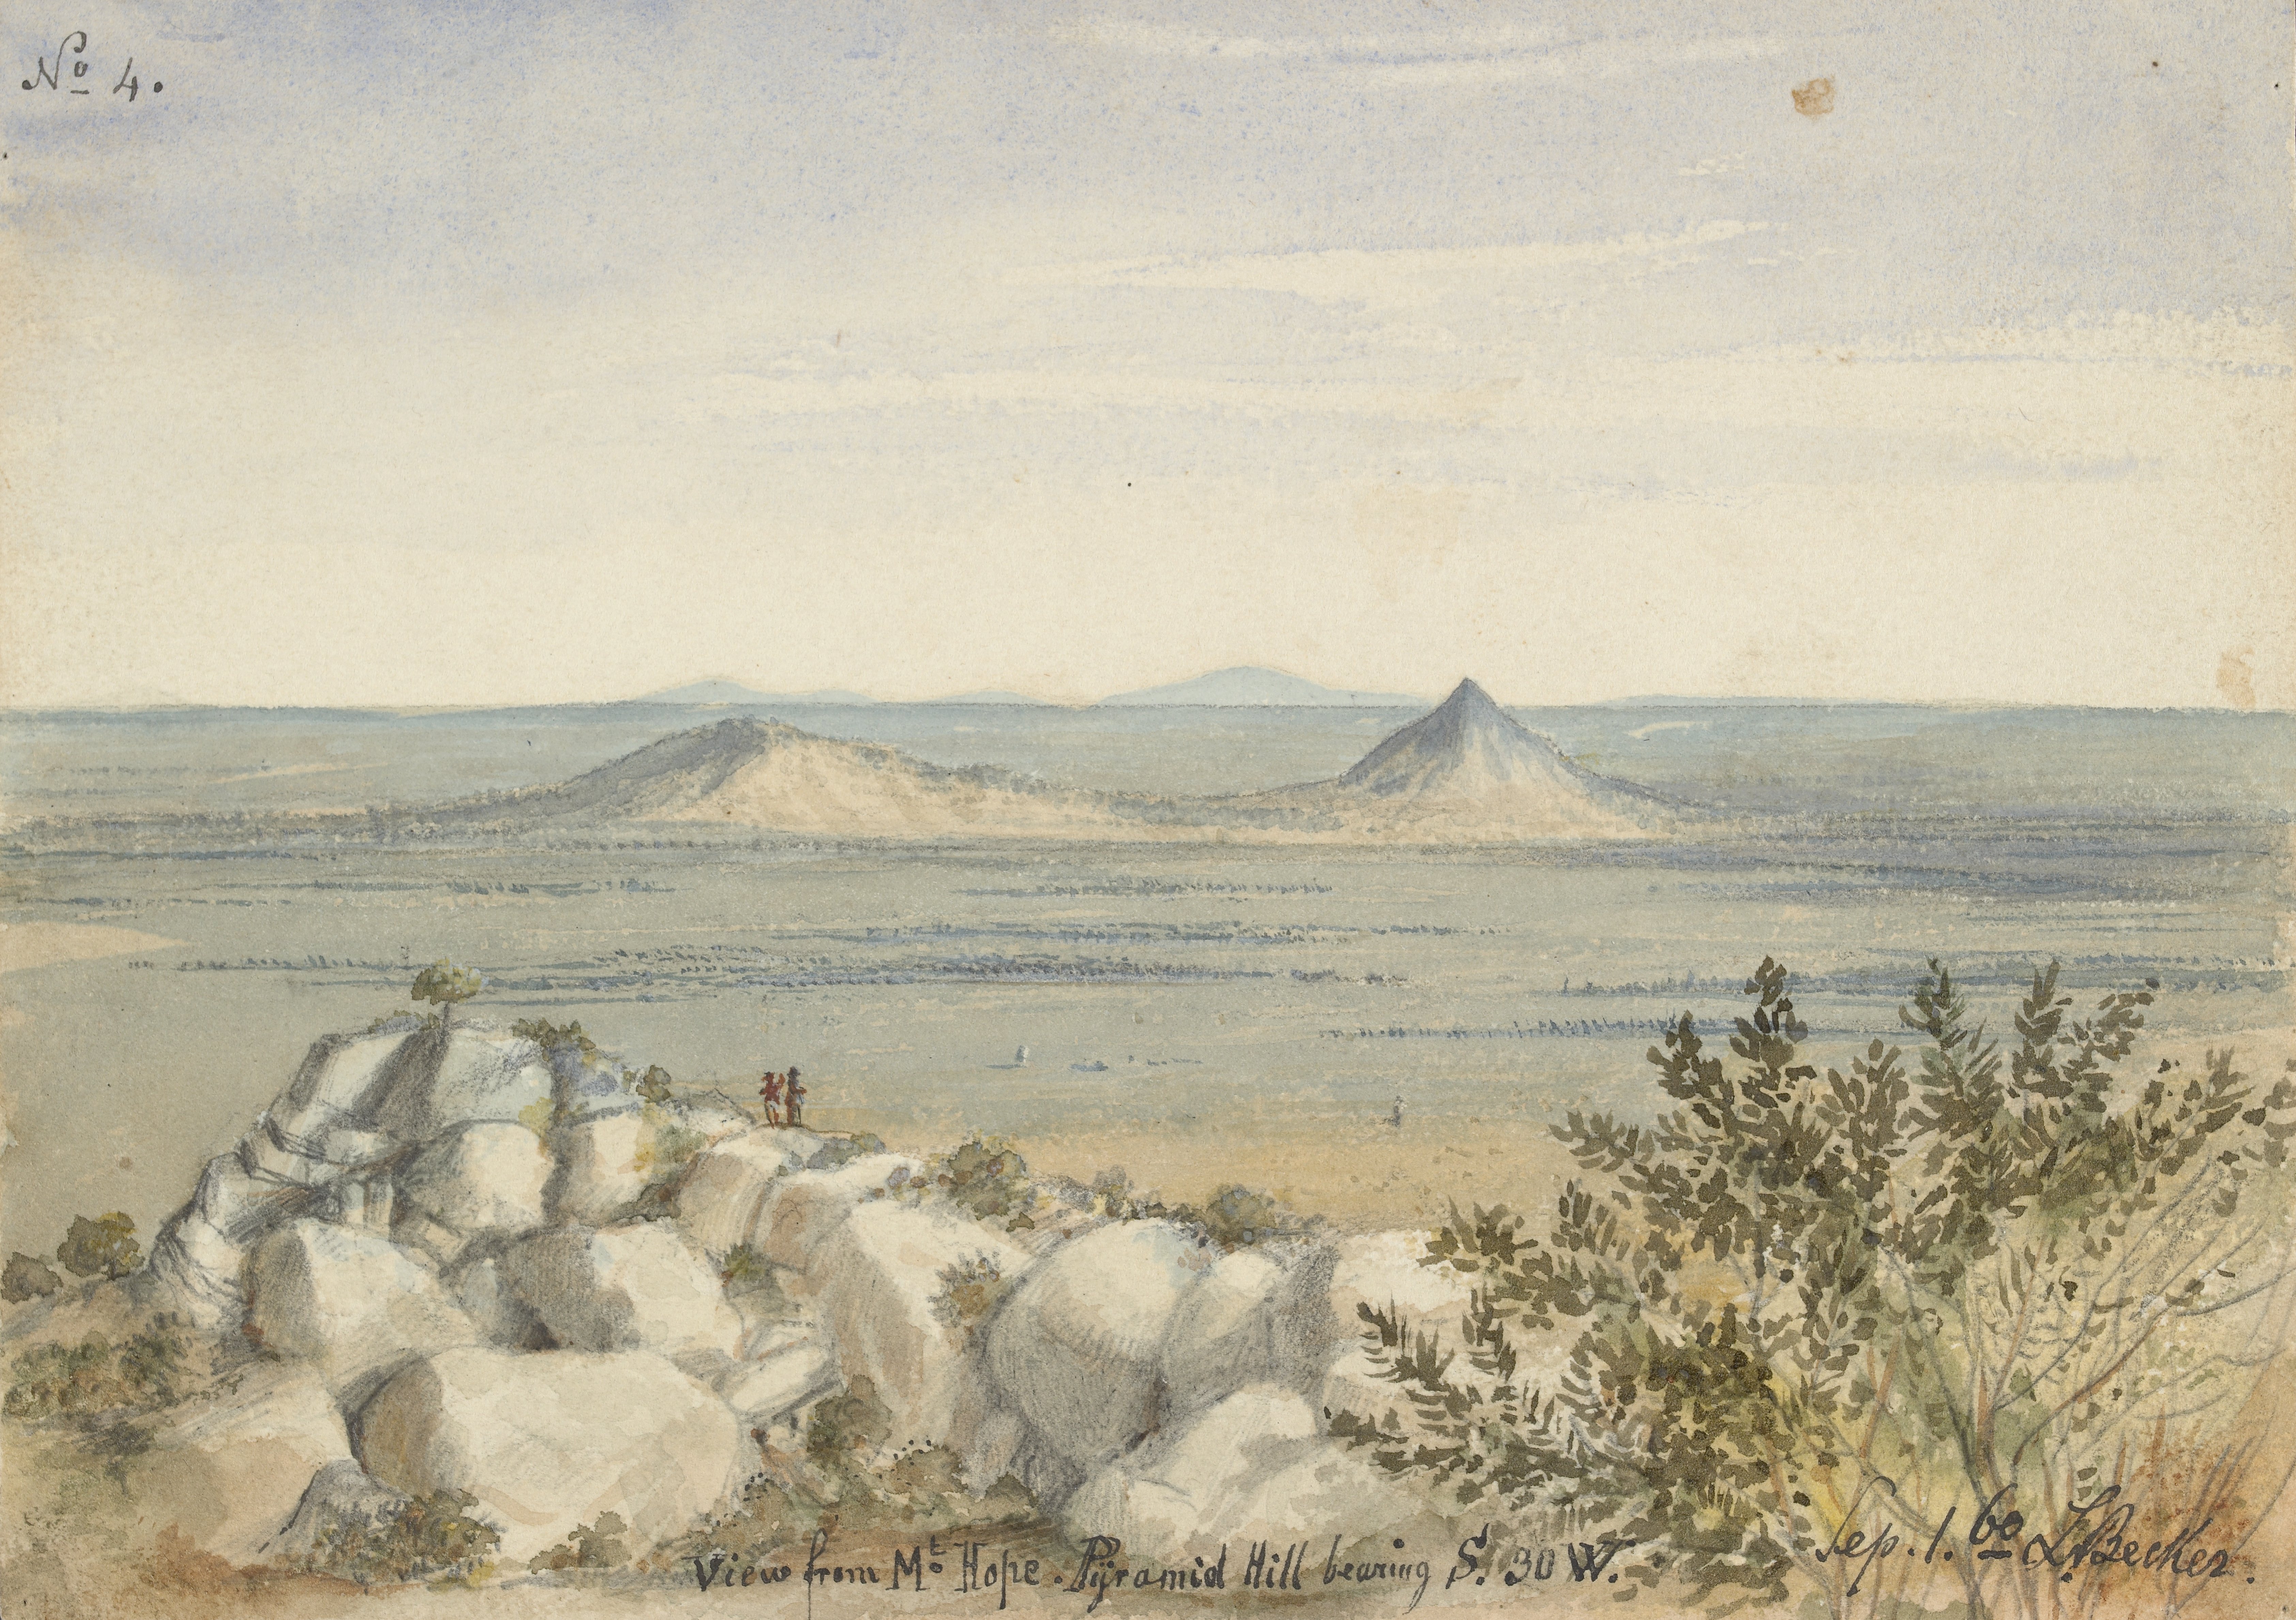 'View from Mt. Hope. Pyramid Hill bearing S. 30W. Sep. 1. 60'. Ludwig Becker. State Library of Victoria.